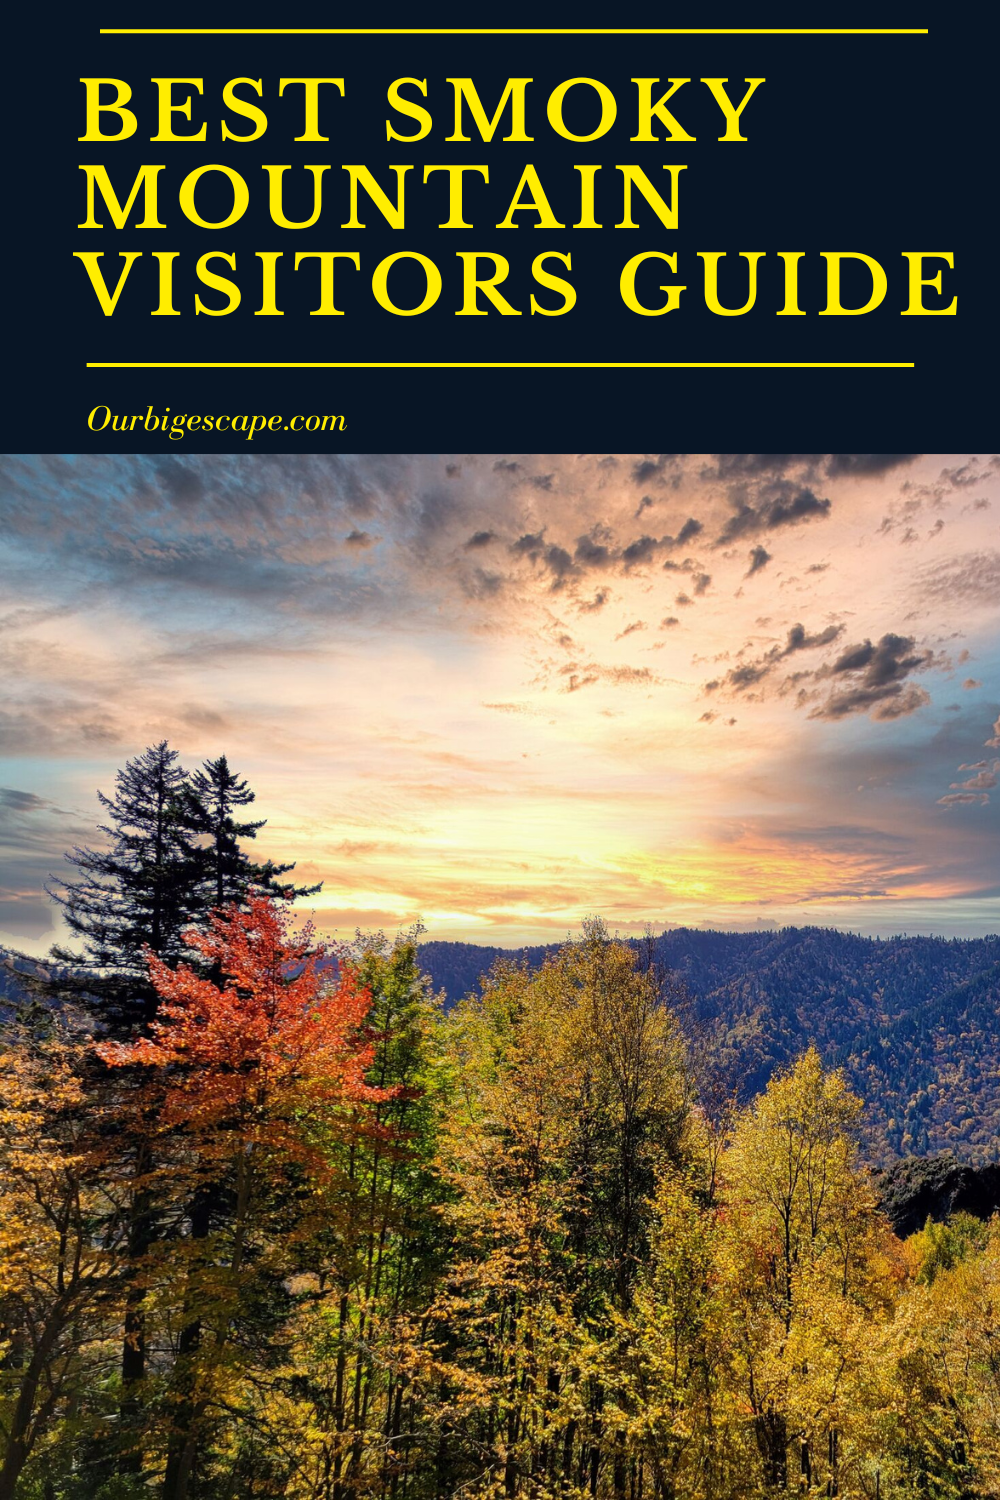 Best Smoky Mountain Visitors Guide (6)